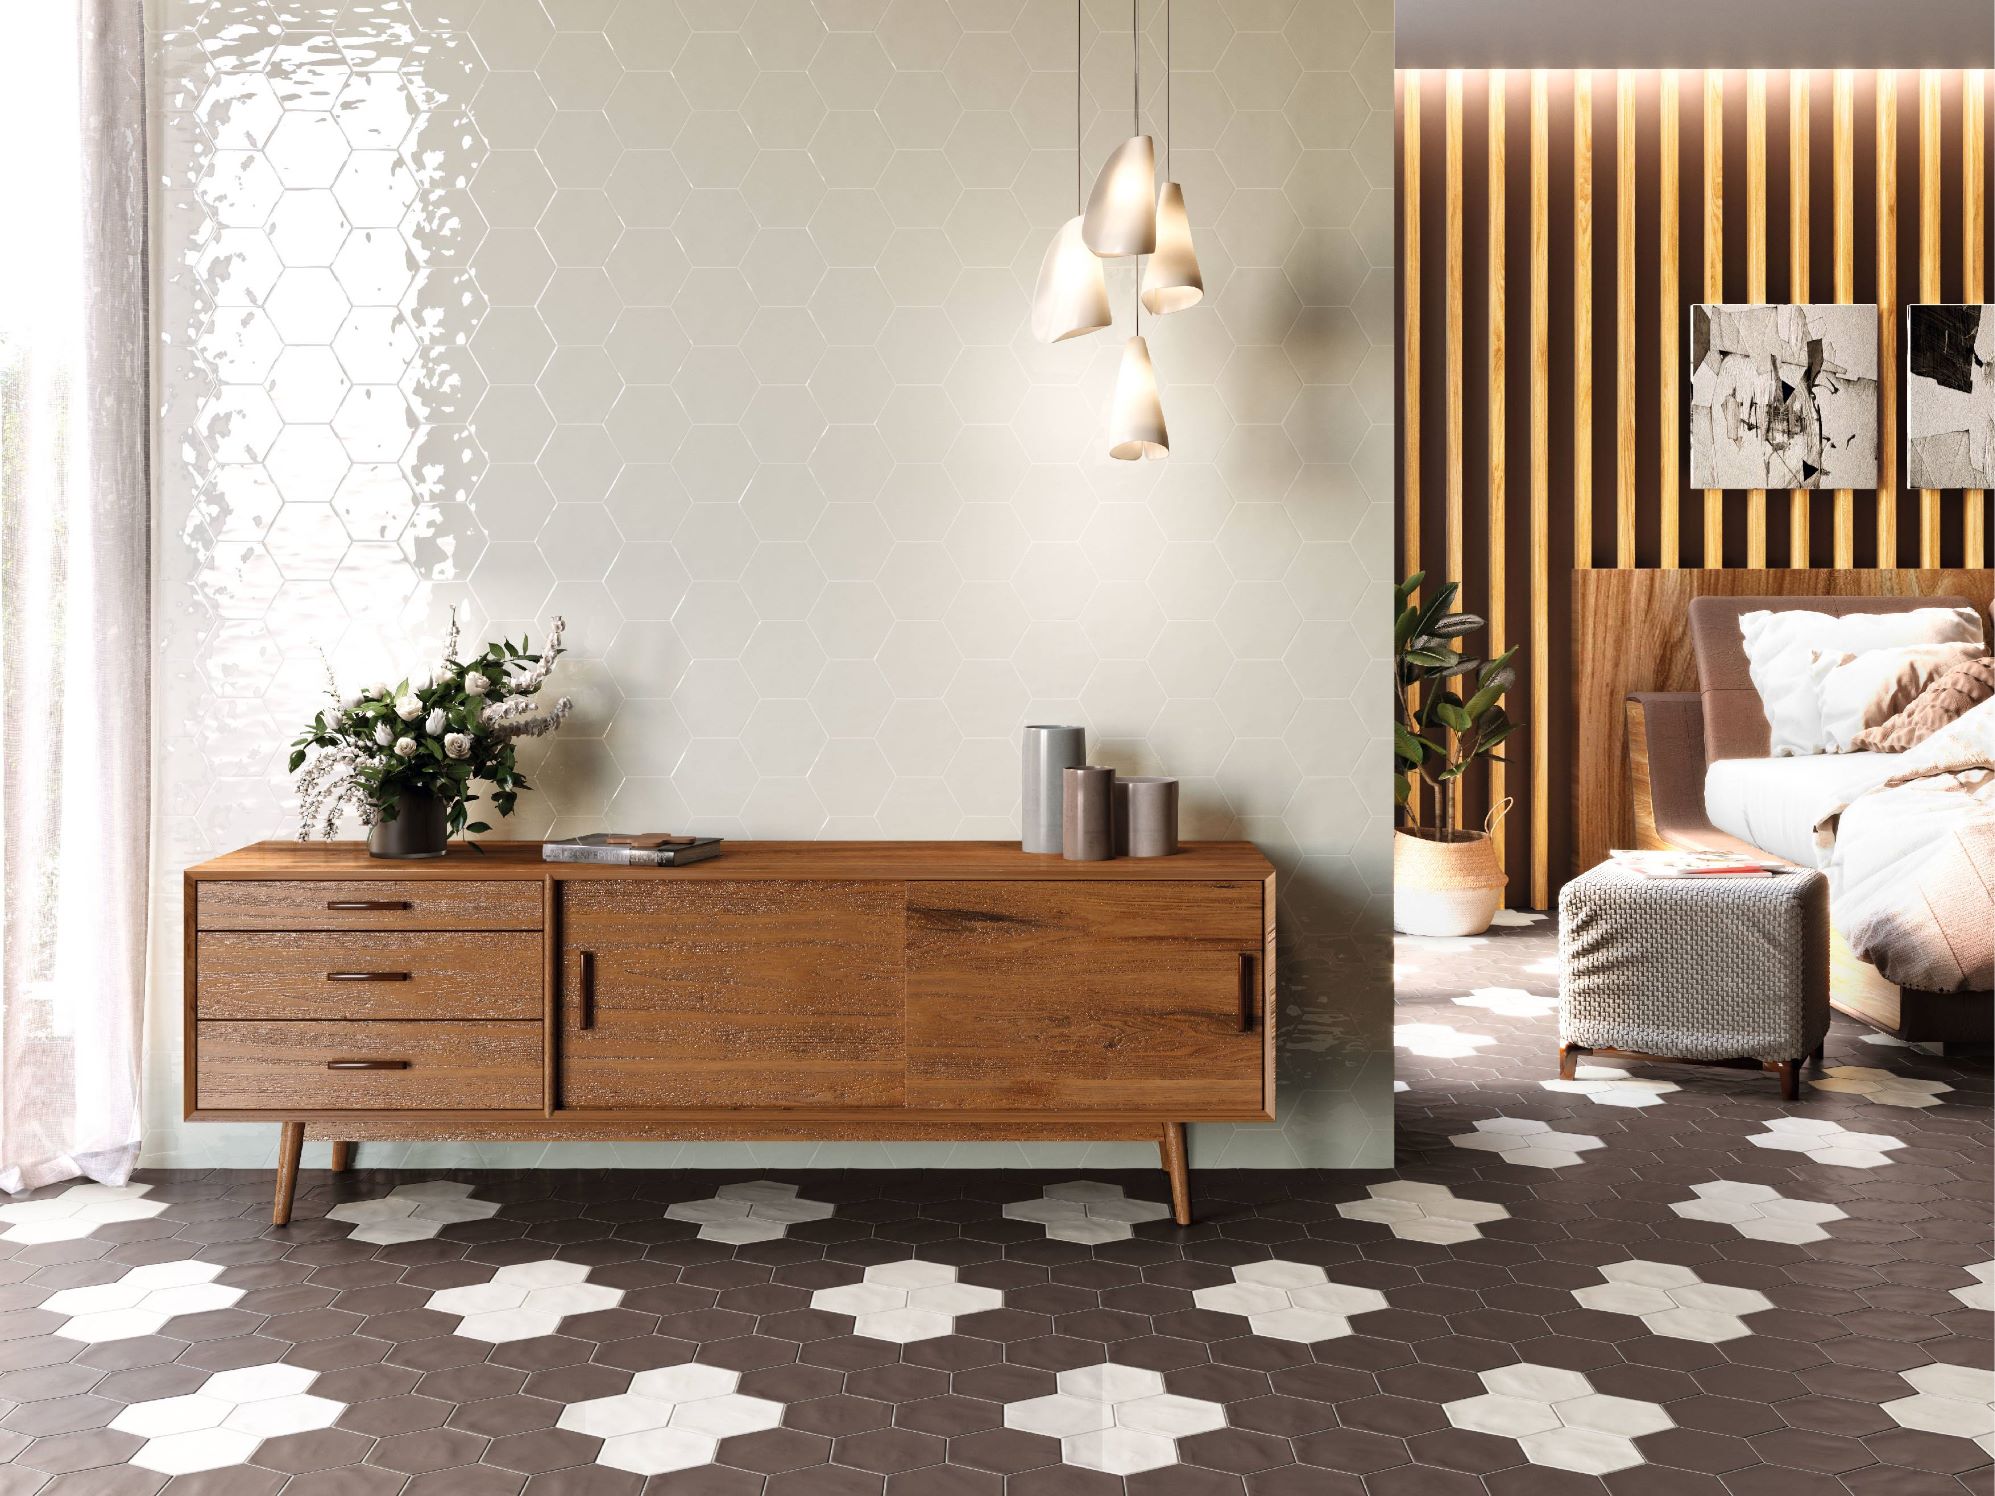 Geometry Hex Crème | Stones & More | Finest selection of Mosaics, Glass, Tile and Stone